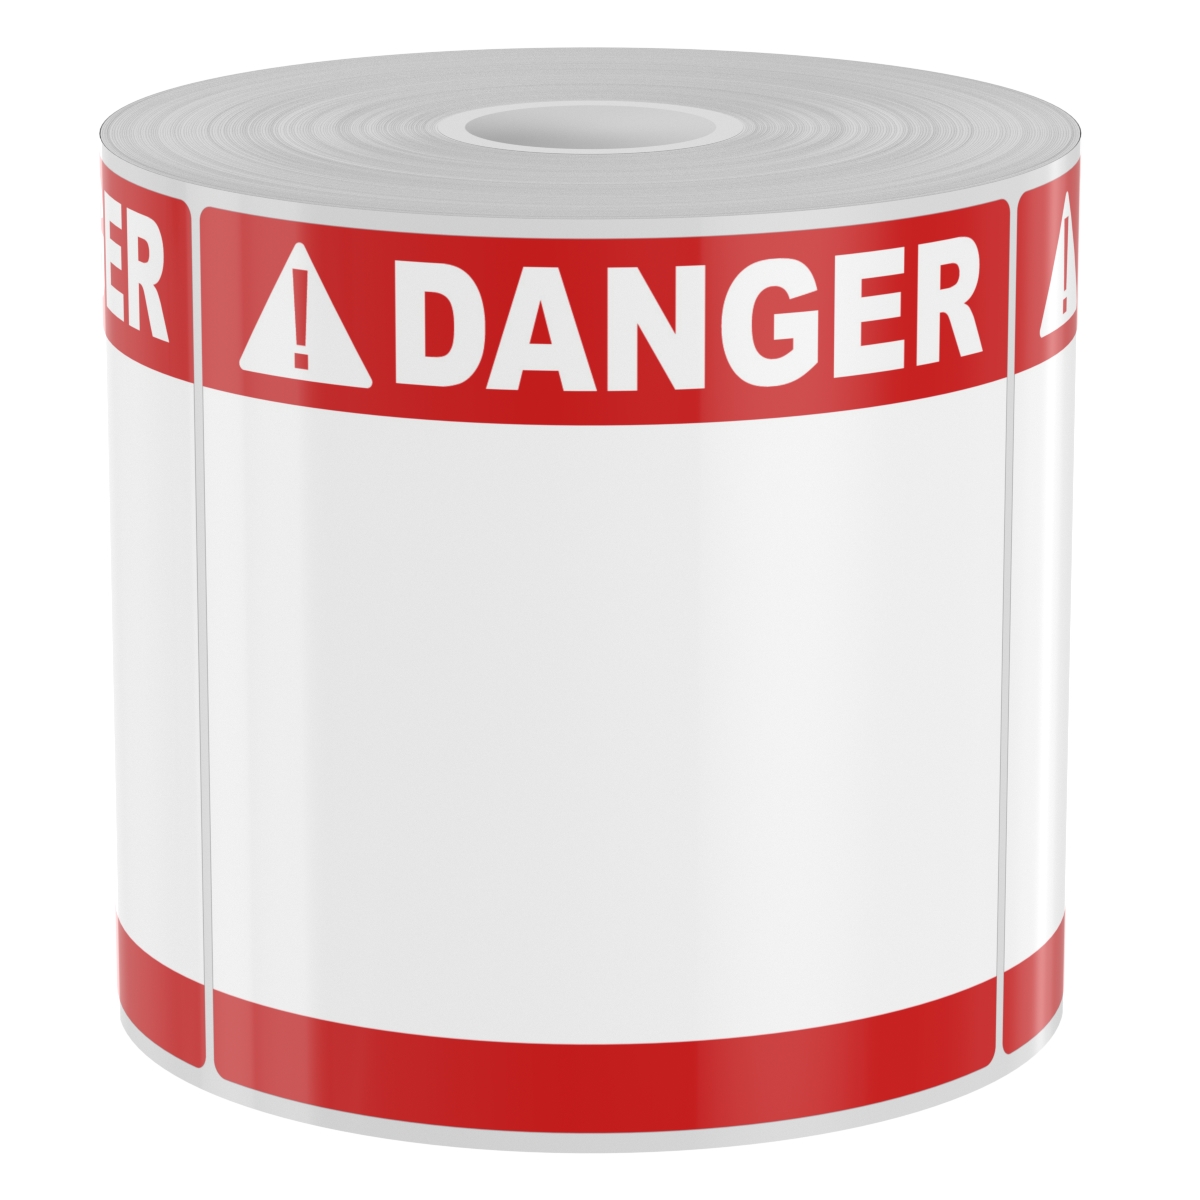 Ask a question about 250 4" x 4" High-Performance Die-Cut Red with White Danger Double Band